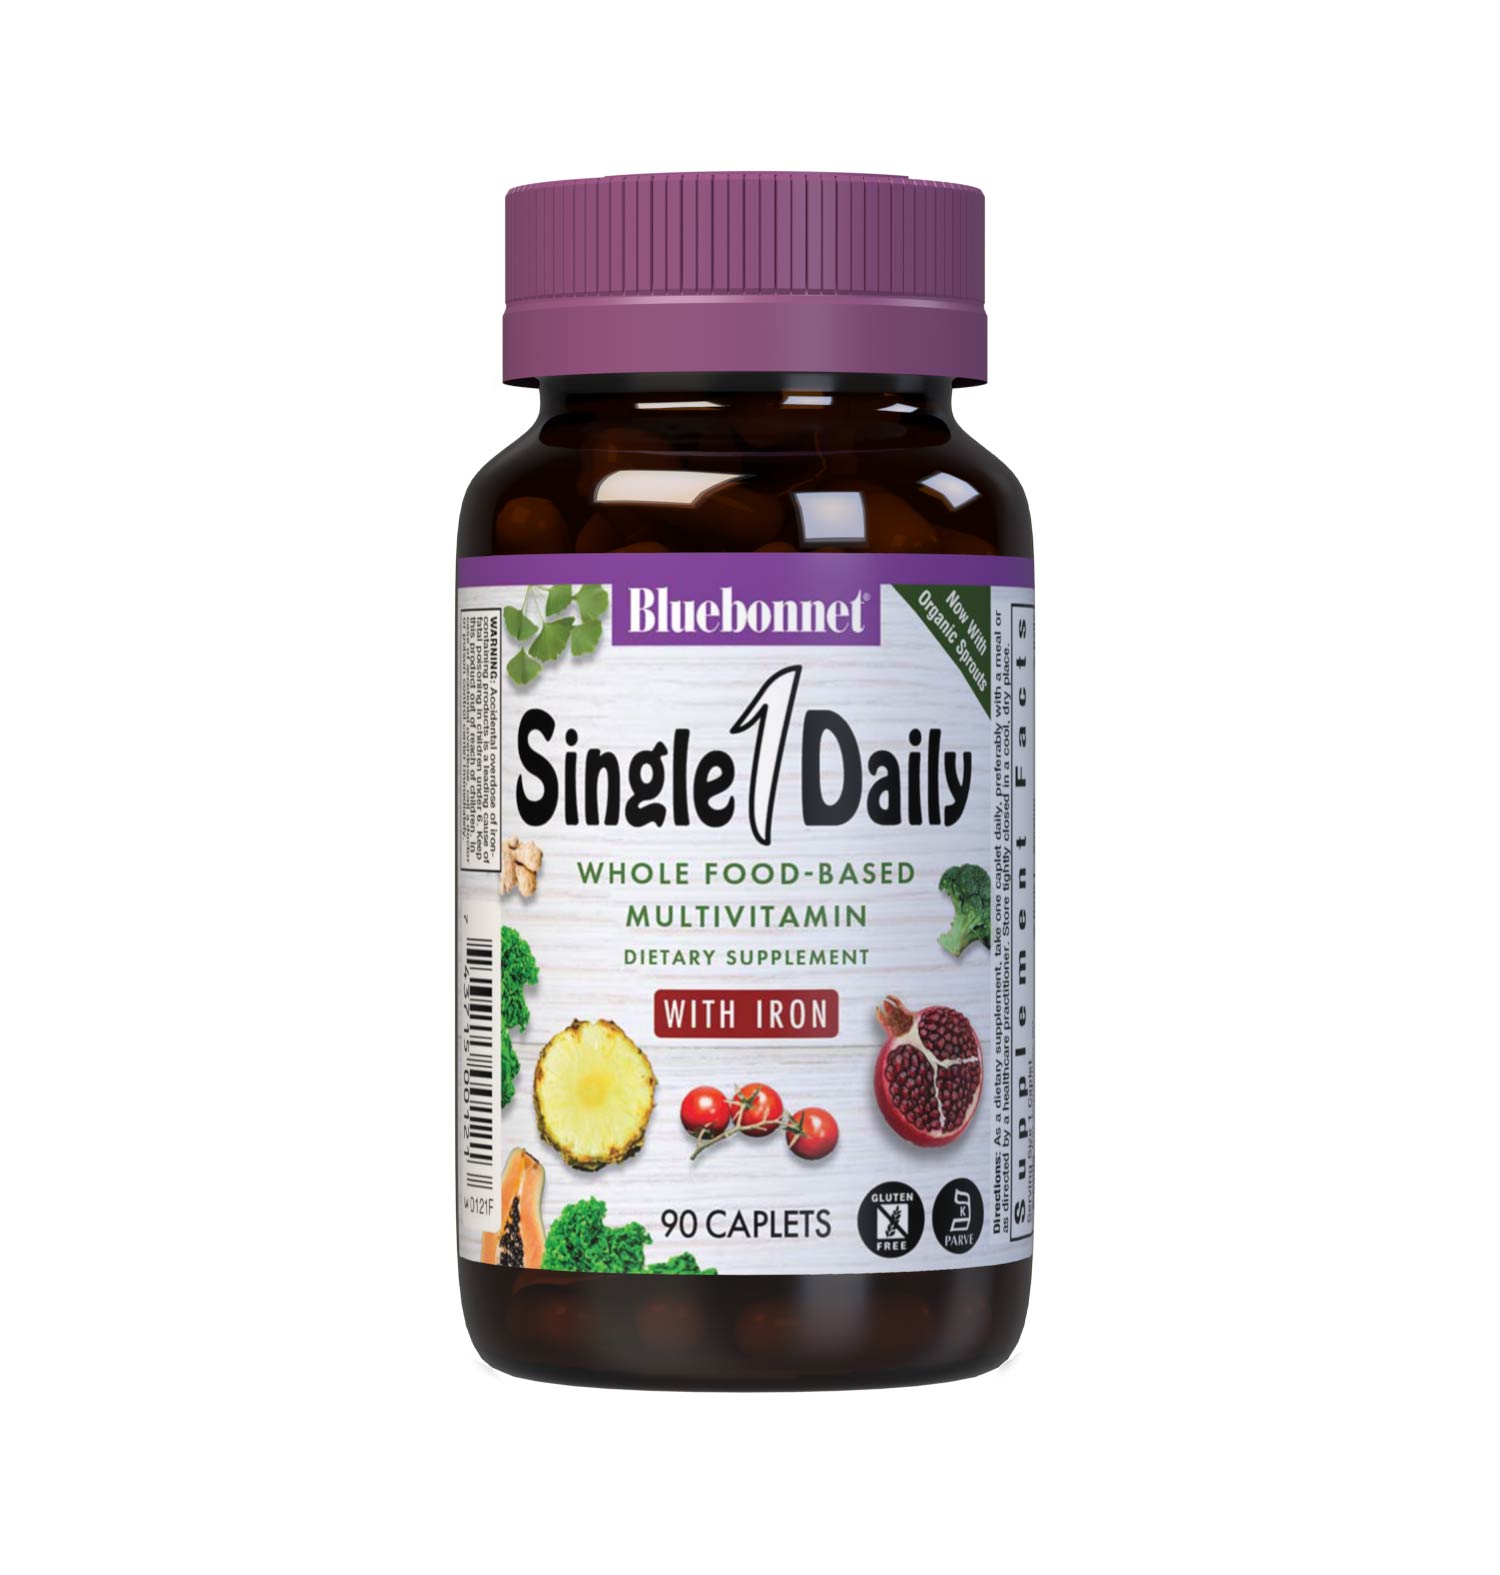 SingleDaily Multiple (With Free) 90 caplets whole food-based formula offers essential vitamins, minerals and enzymes from unique, kosher-certified, plant-based ingredients, such as adaptogenic and immune-boosting herbs, greens from nutrient-dense spirulina, chlorella and chlorophyll, lycopene from tomatoes and potent anti-aging antioxidants from pomegranate fruit. #size_90 count